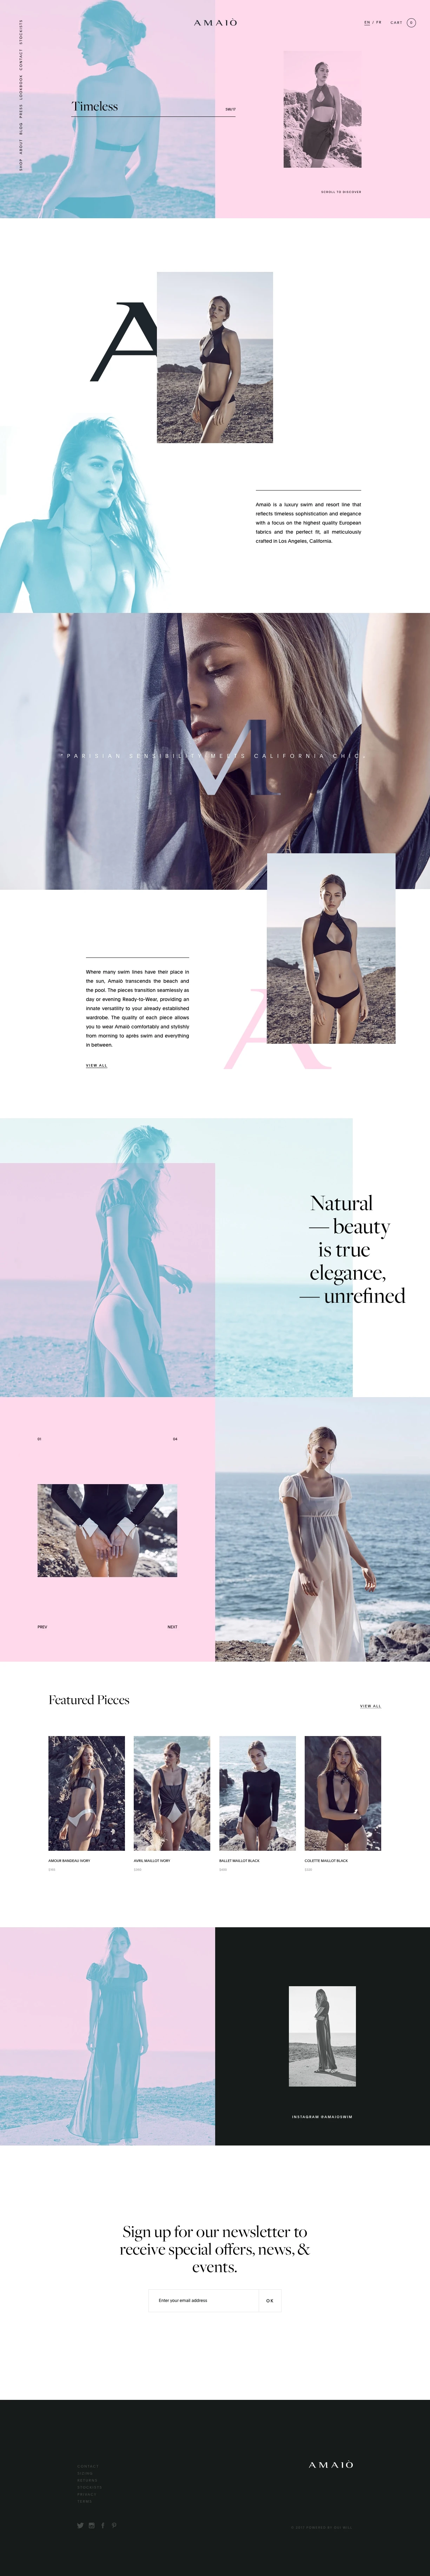 AMAIÒ Landing Page Example: AMAIÒ is a luxury women’s designer swimwear label that blurs the line between designer bathing suits and ready-to-wear.